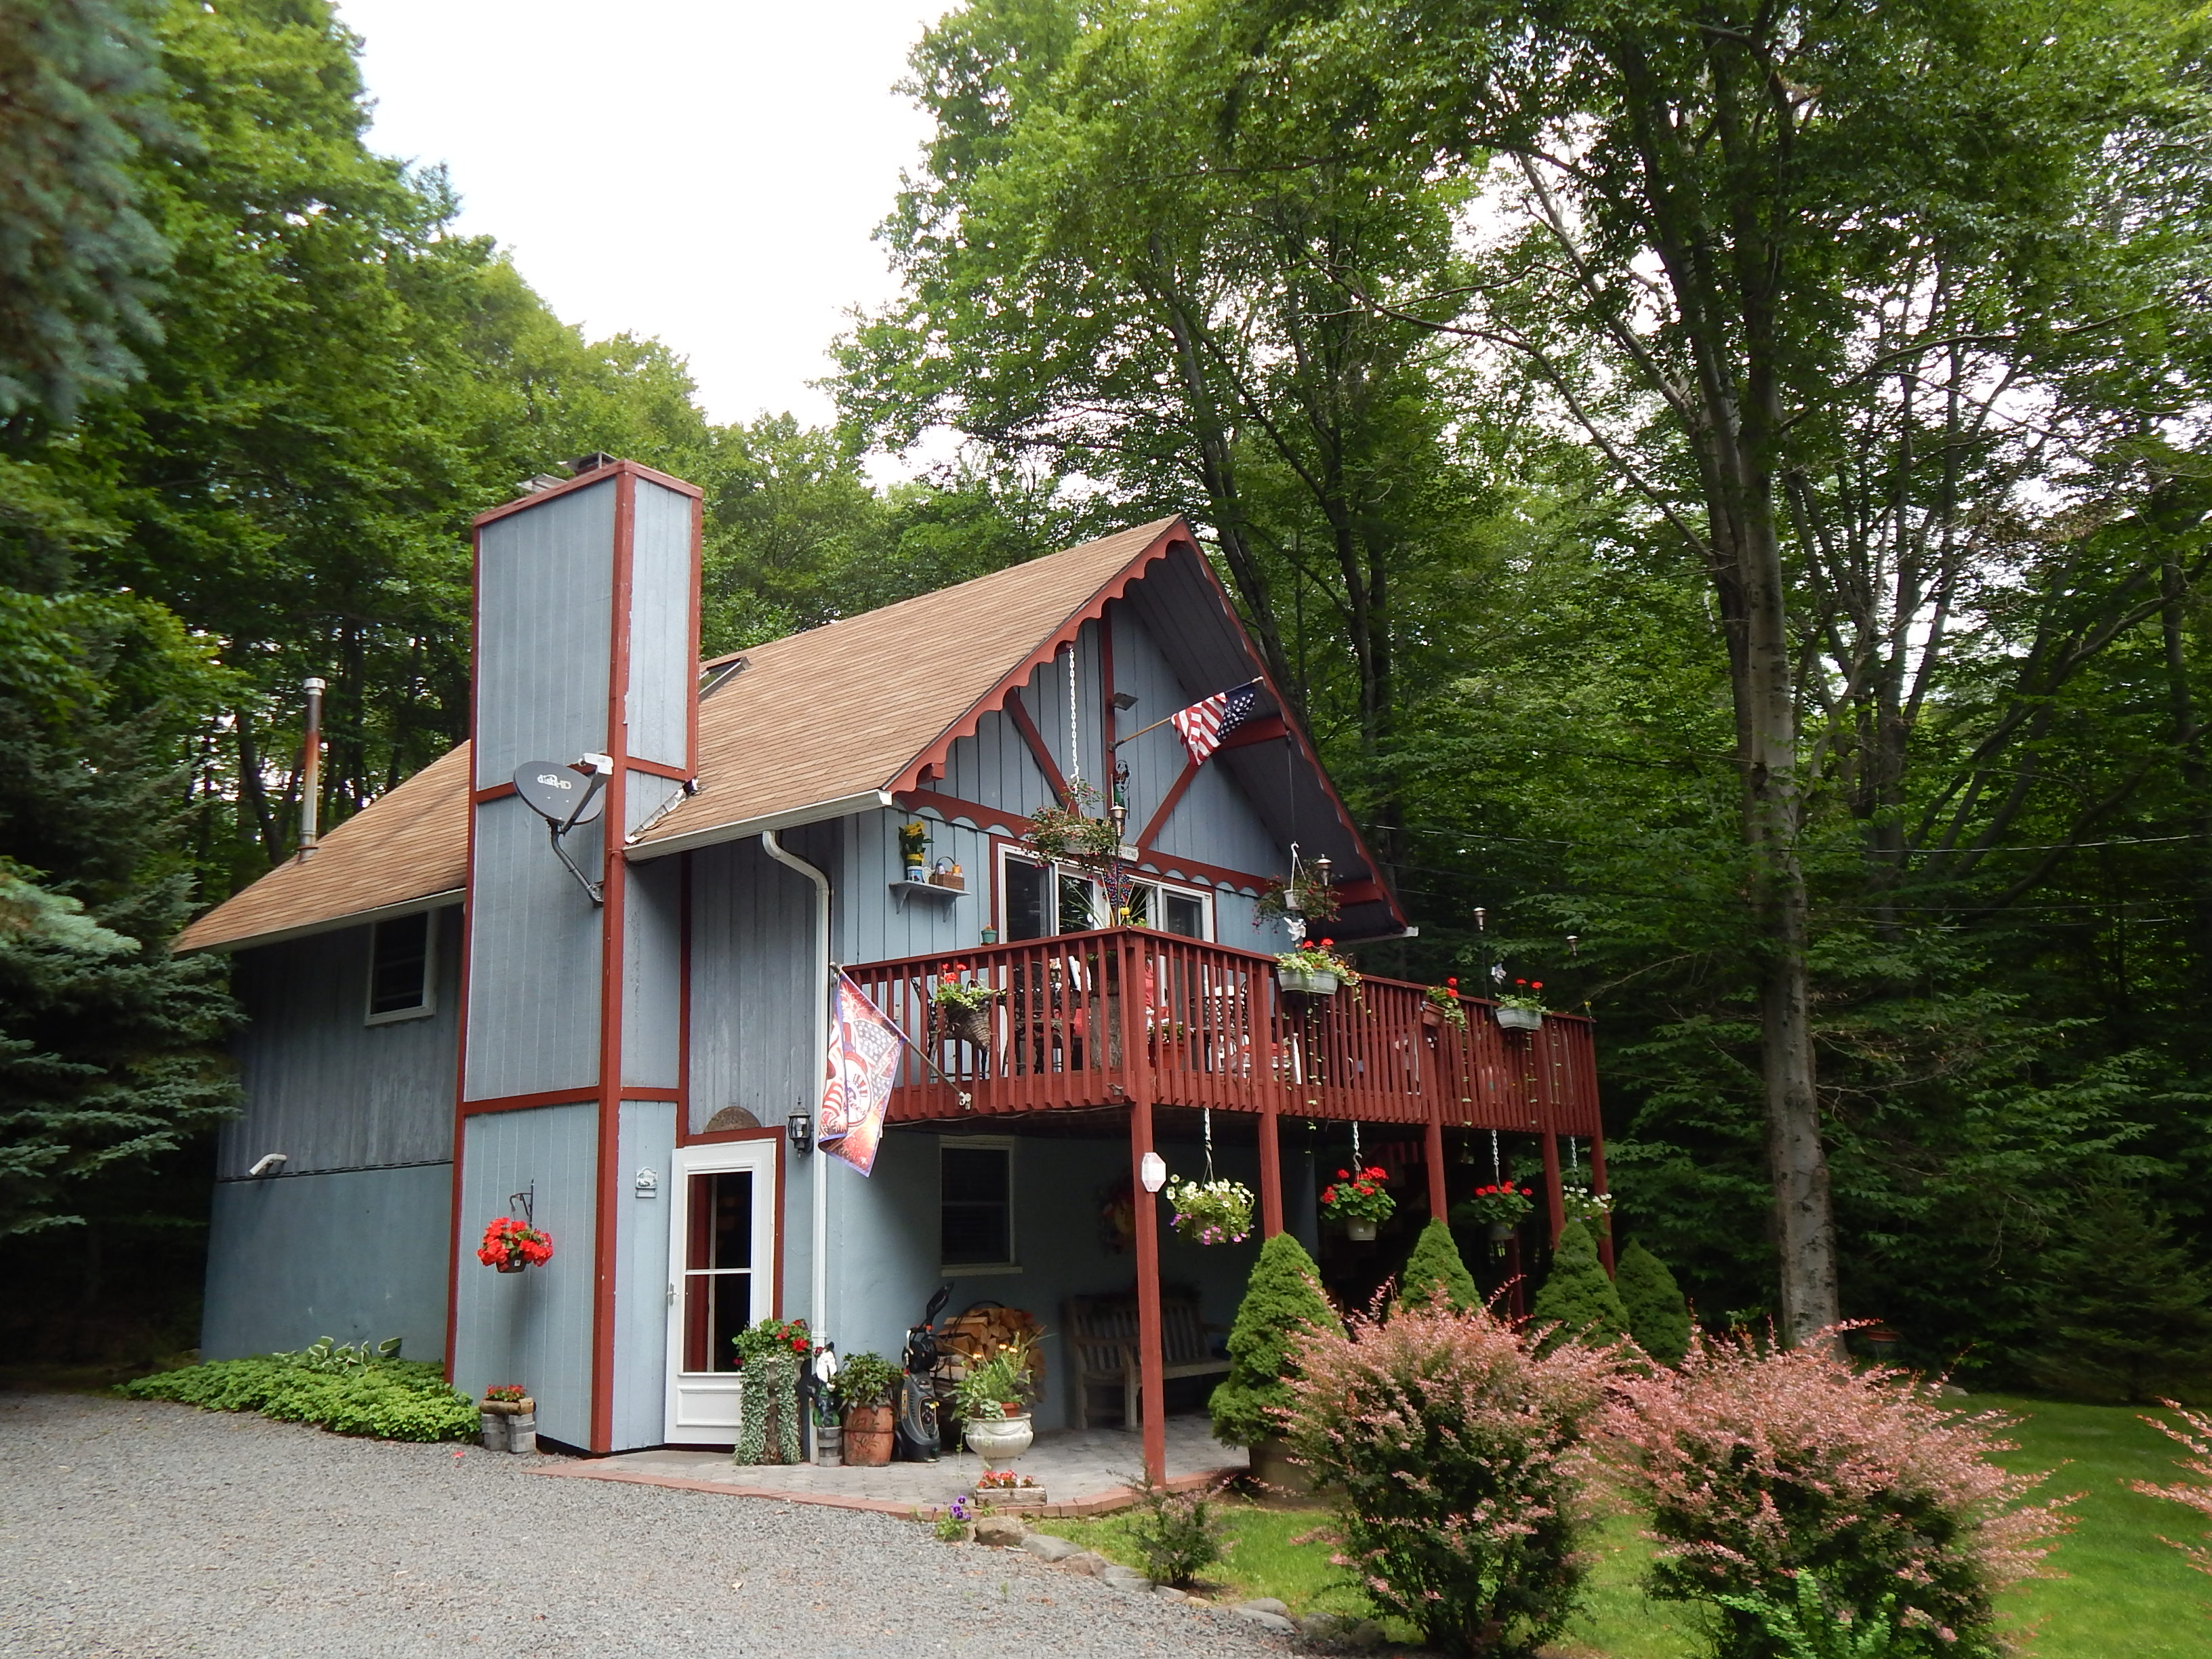 This is a "best buy" you don't want to pass by - Chalet for sale in Pocono Lake, PA  18347